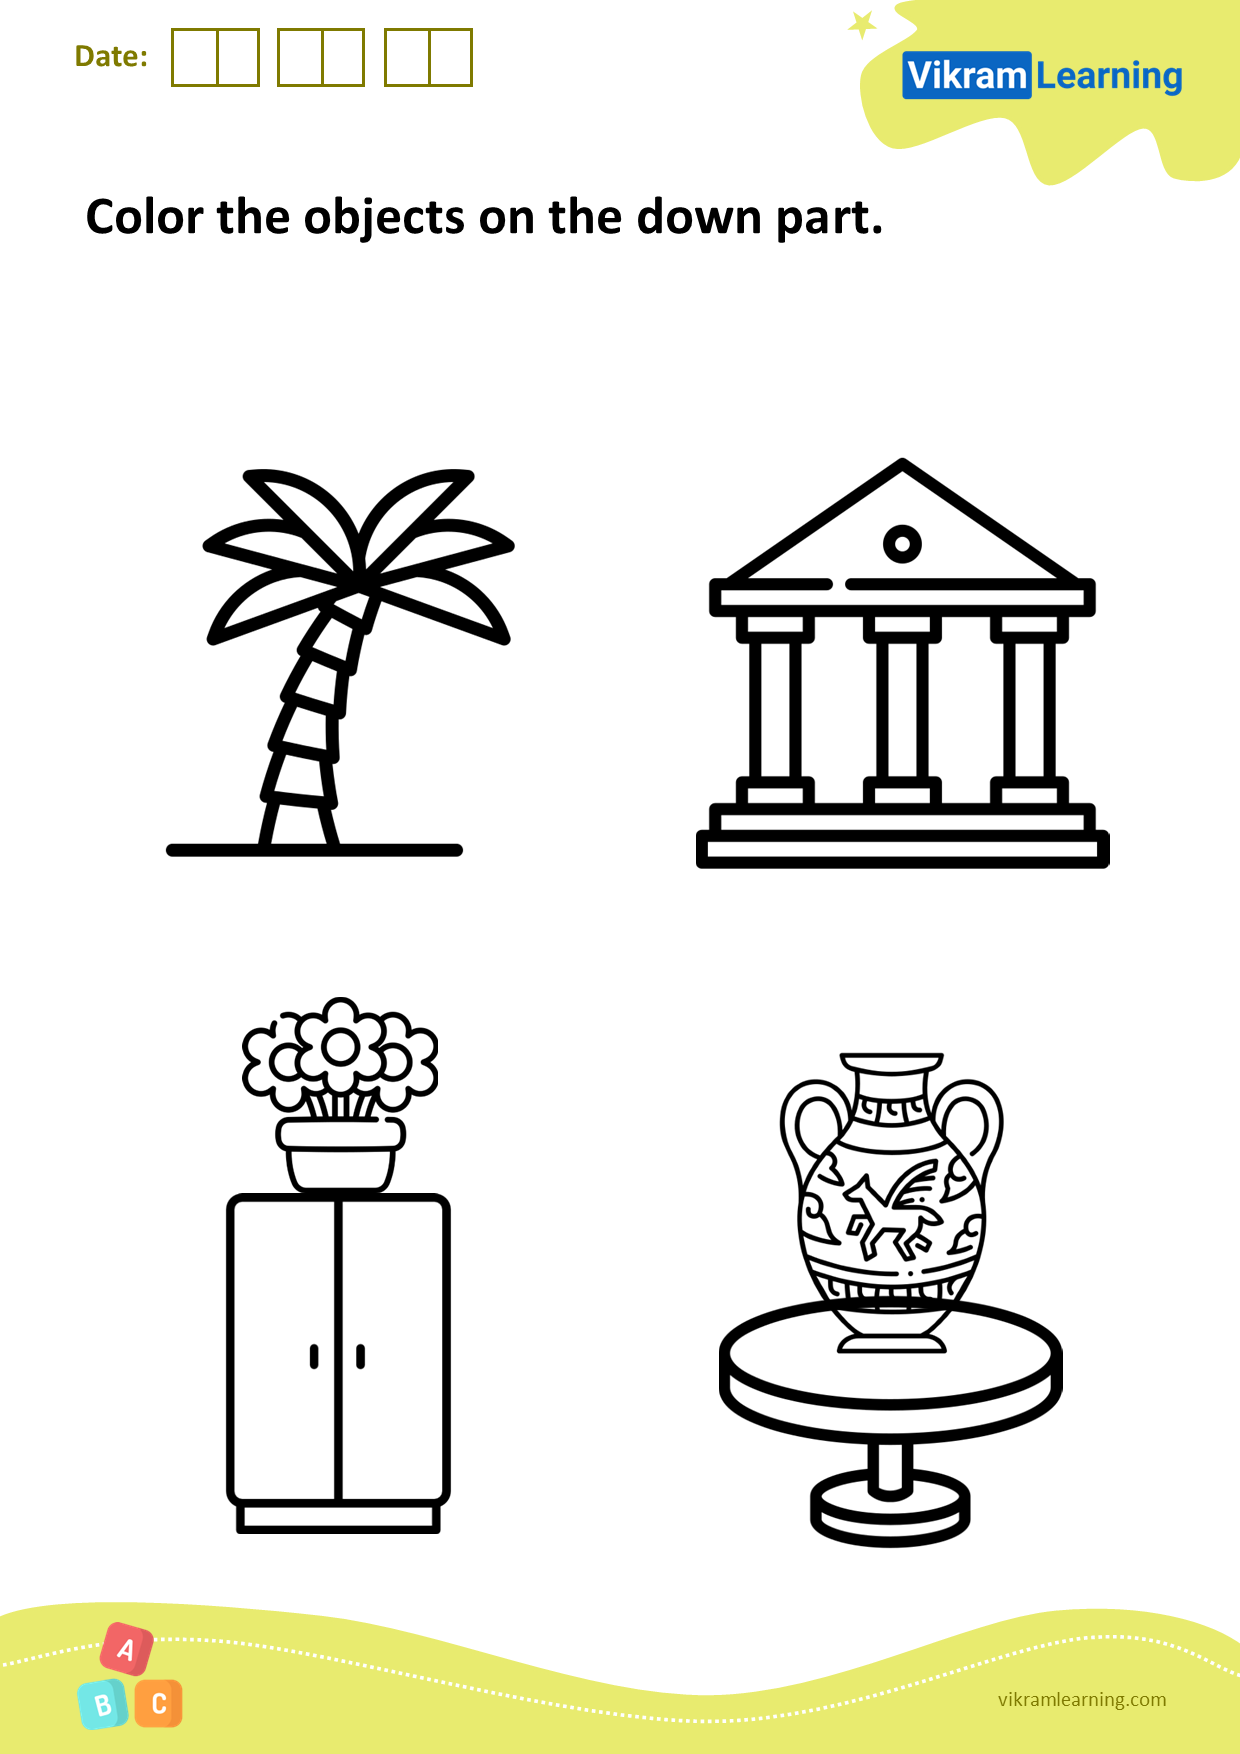 Download color the objects on the down part worksheets